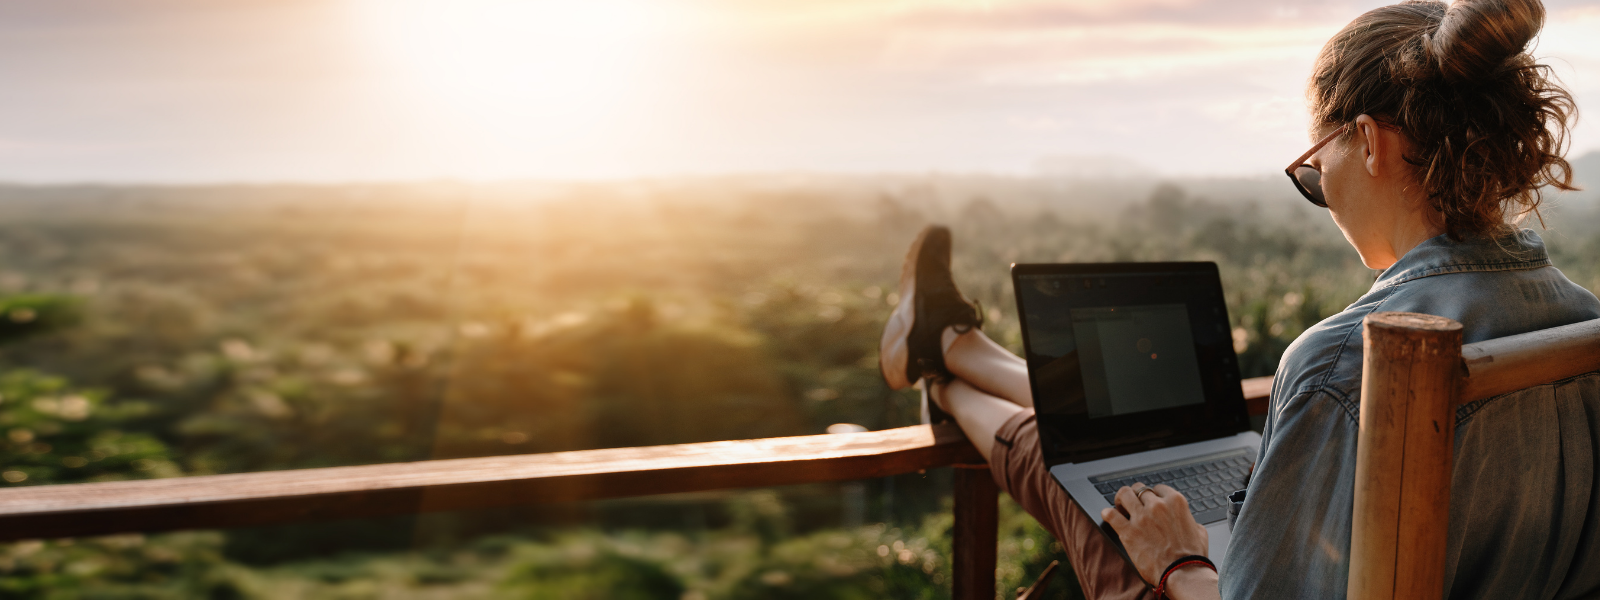 girl sitting on porch on computer during sunset